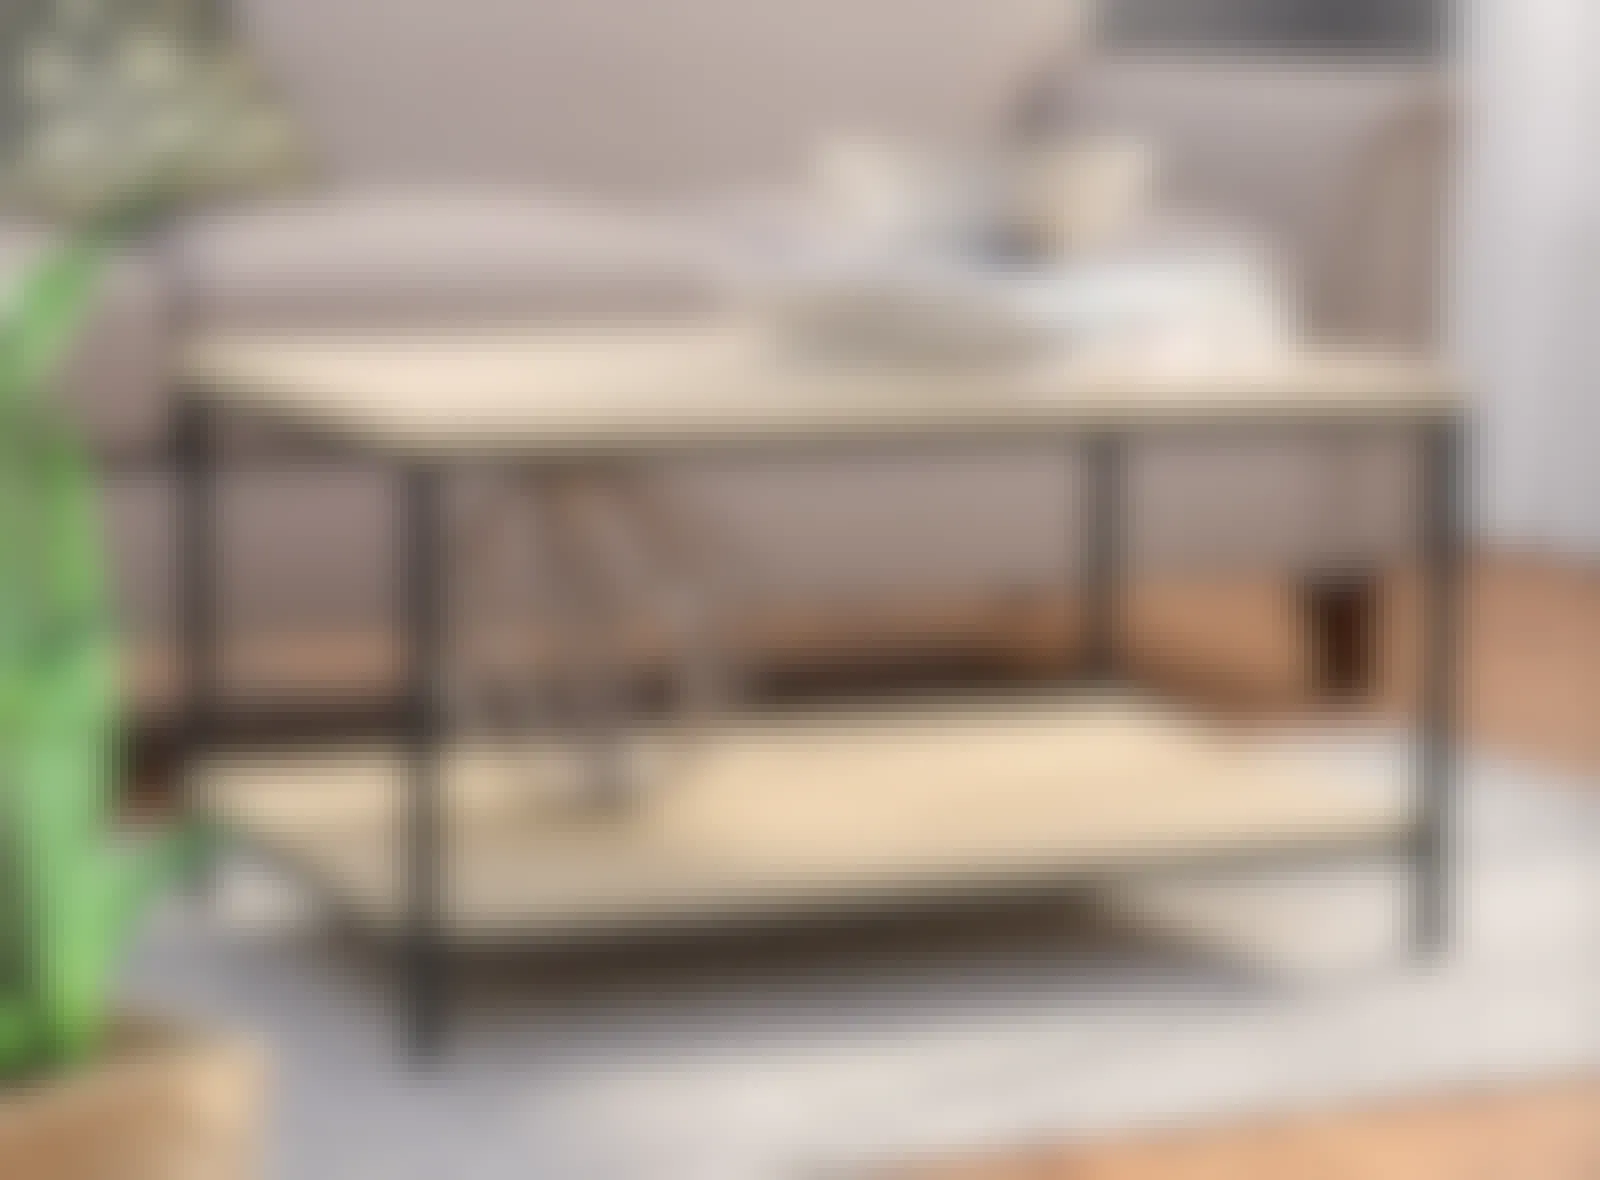 A screenshot of a Hanni 4 legs coffee table with storage set up in a living room from the Wayfair website.